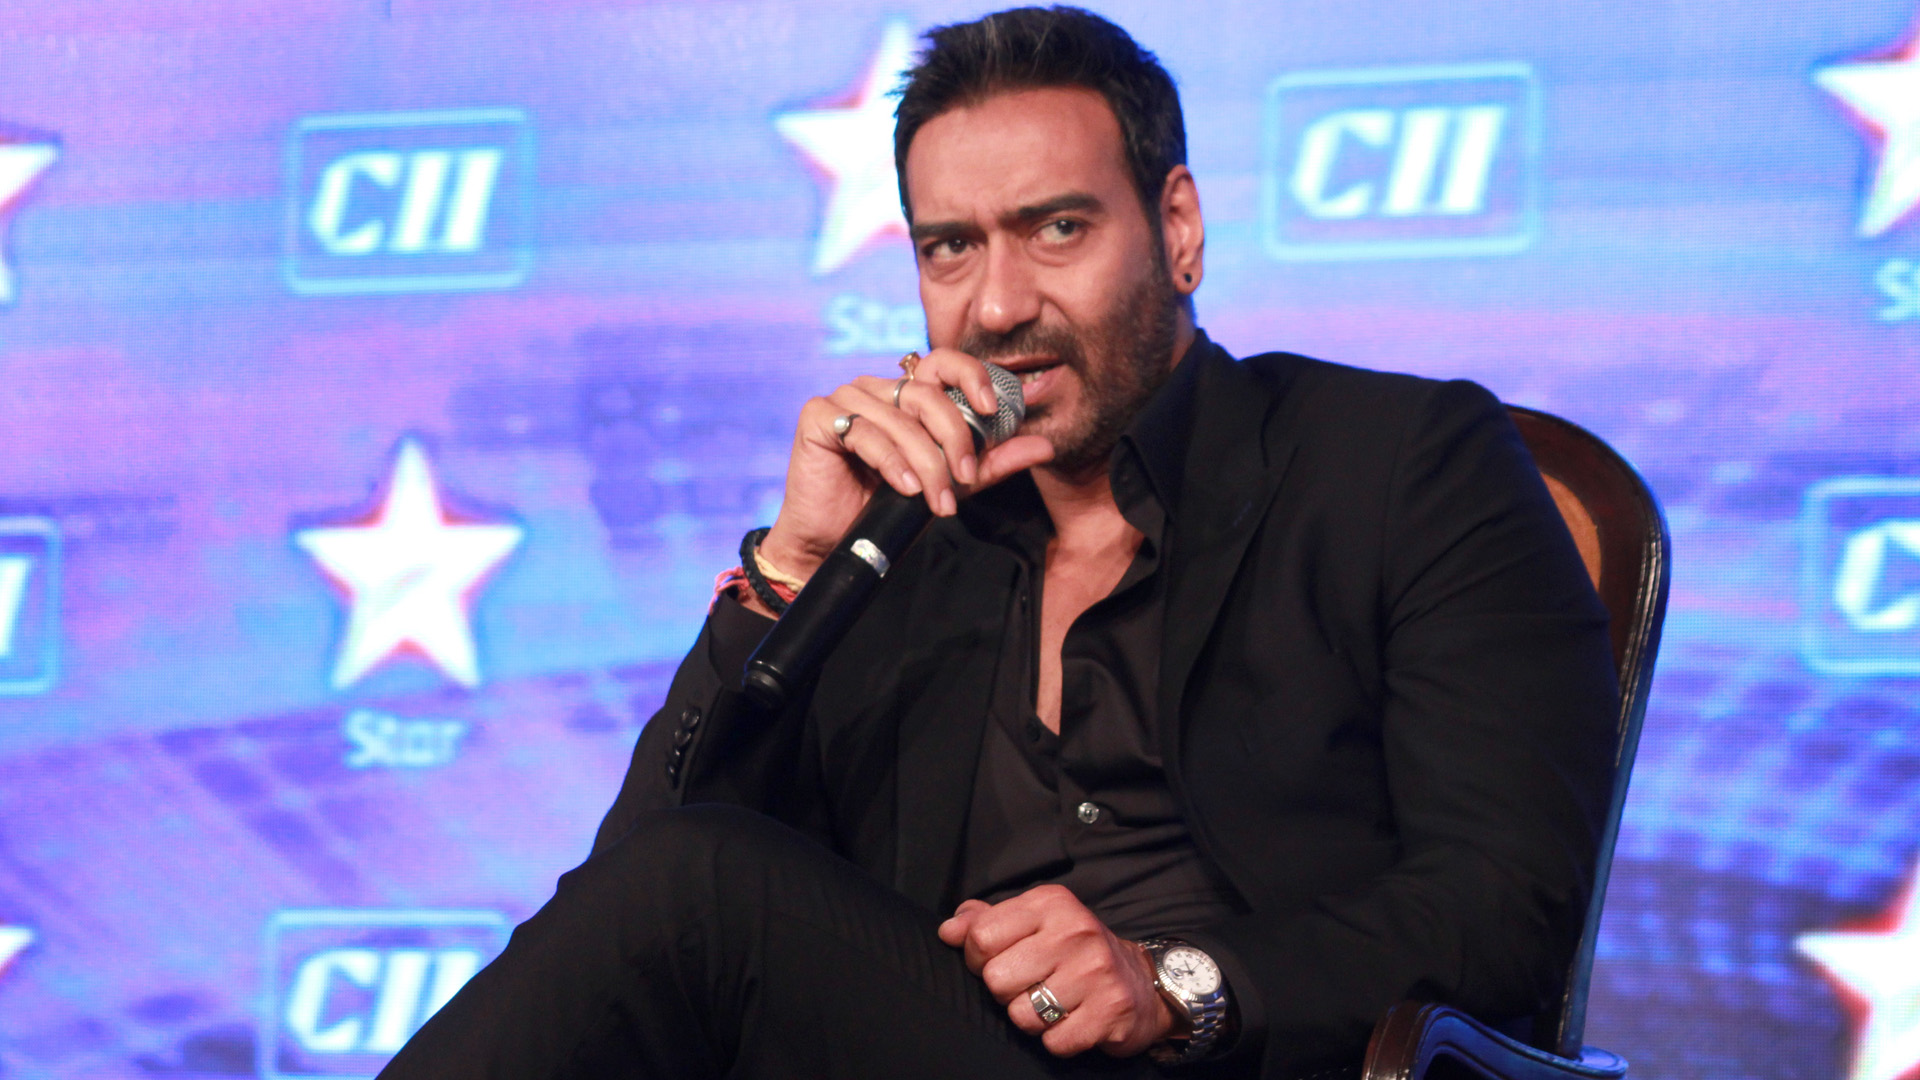 Bored of seeing action in Bollywood films: Ajay Devgn